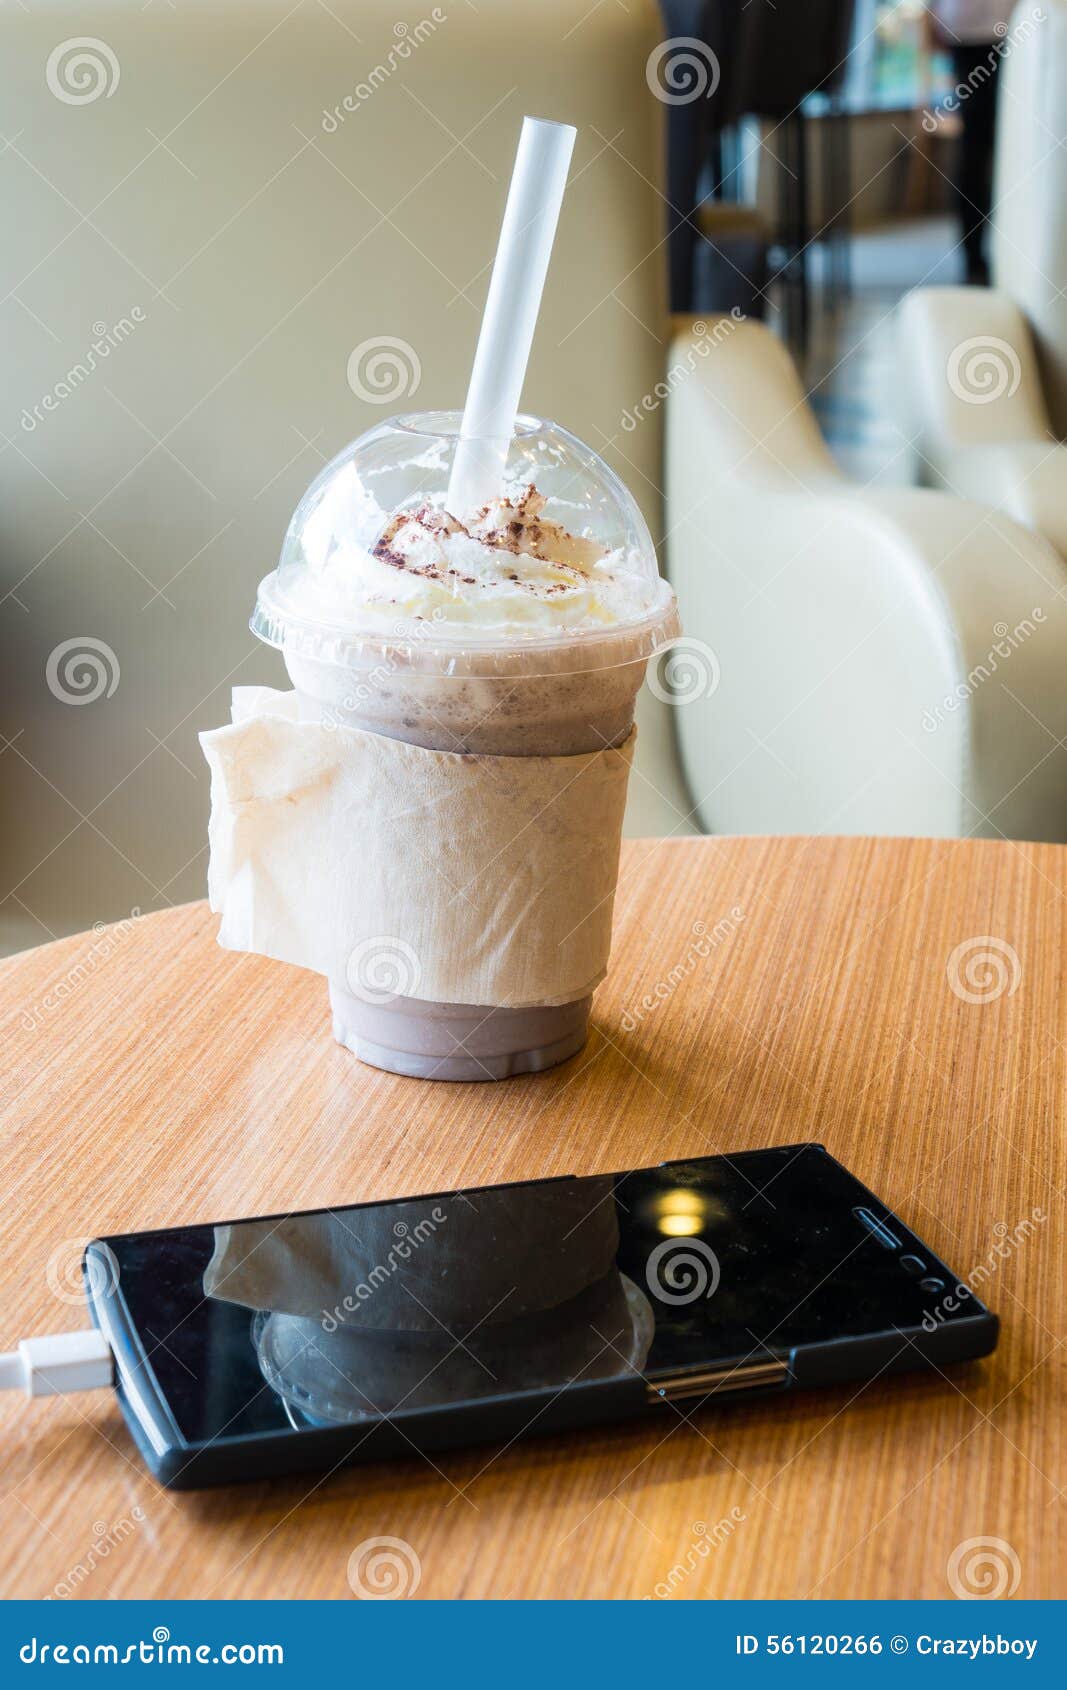 cell phone charging in the cafe with a plastic cup of iced chocolate frappe